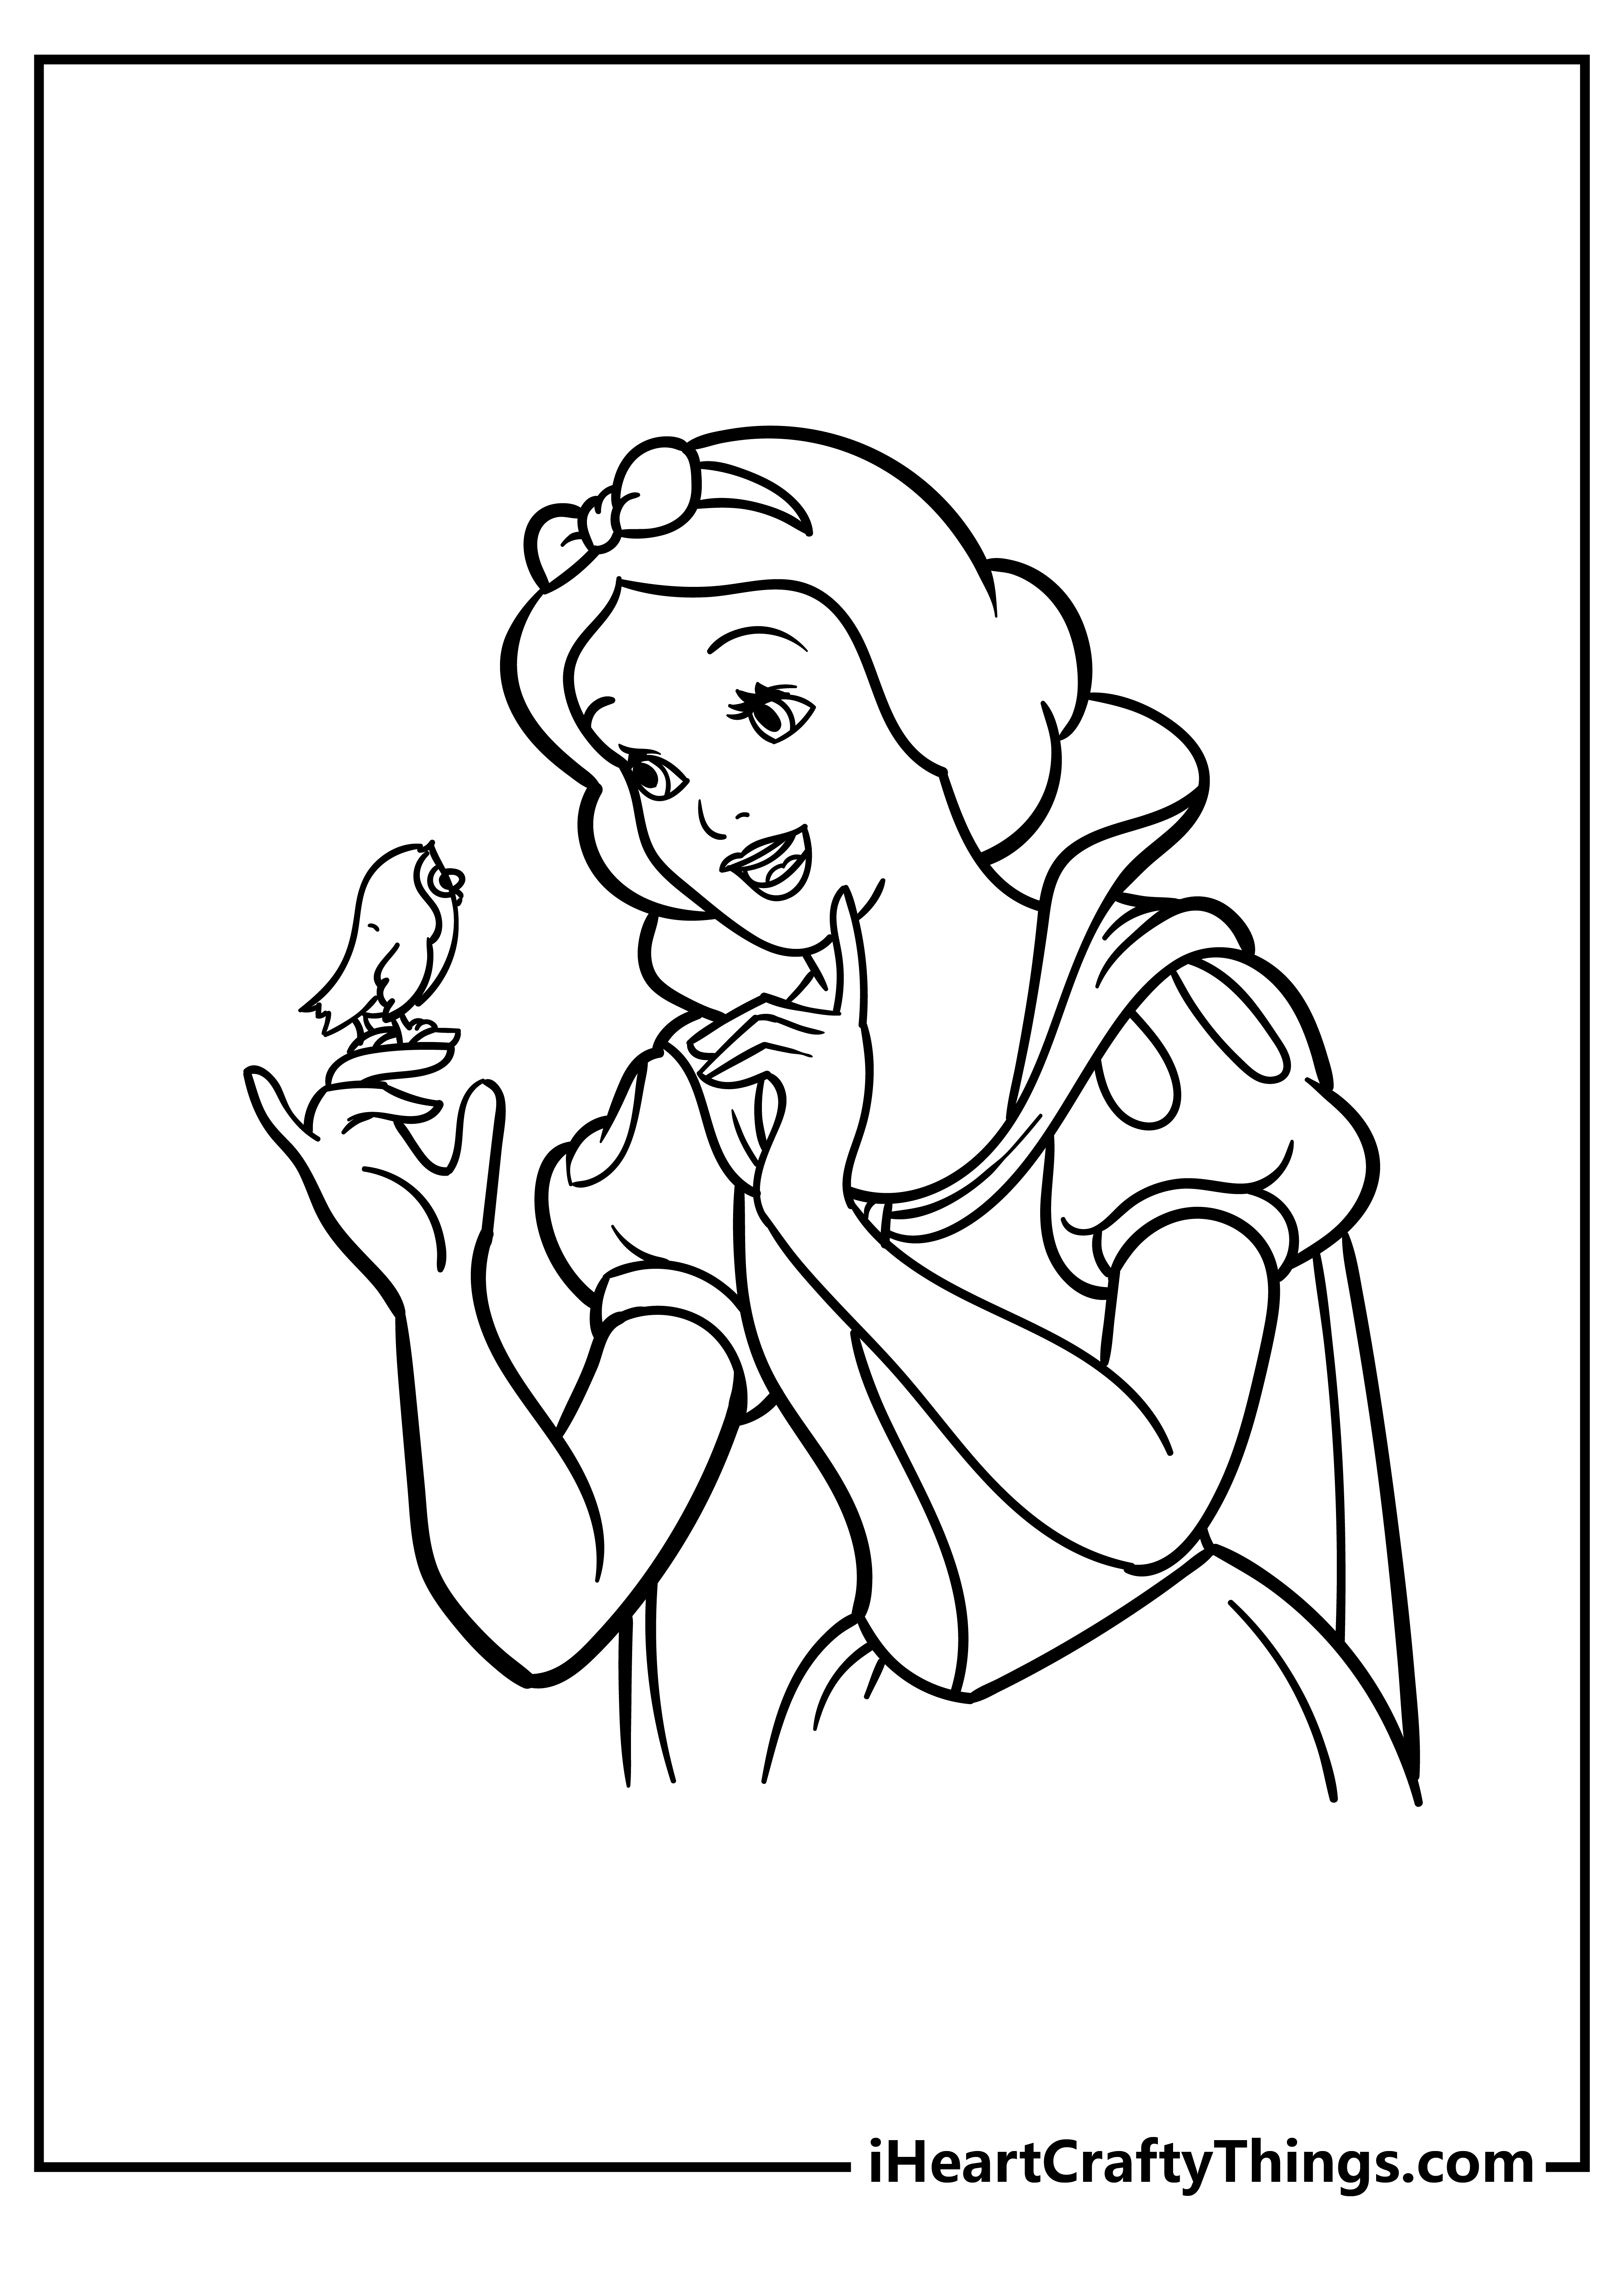 Snow White Coloring Pages for preschoolers free printable